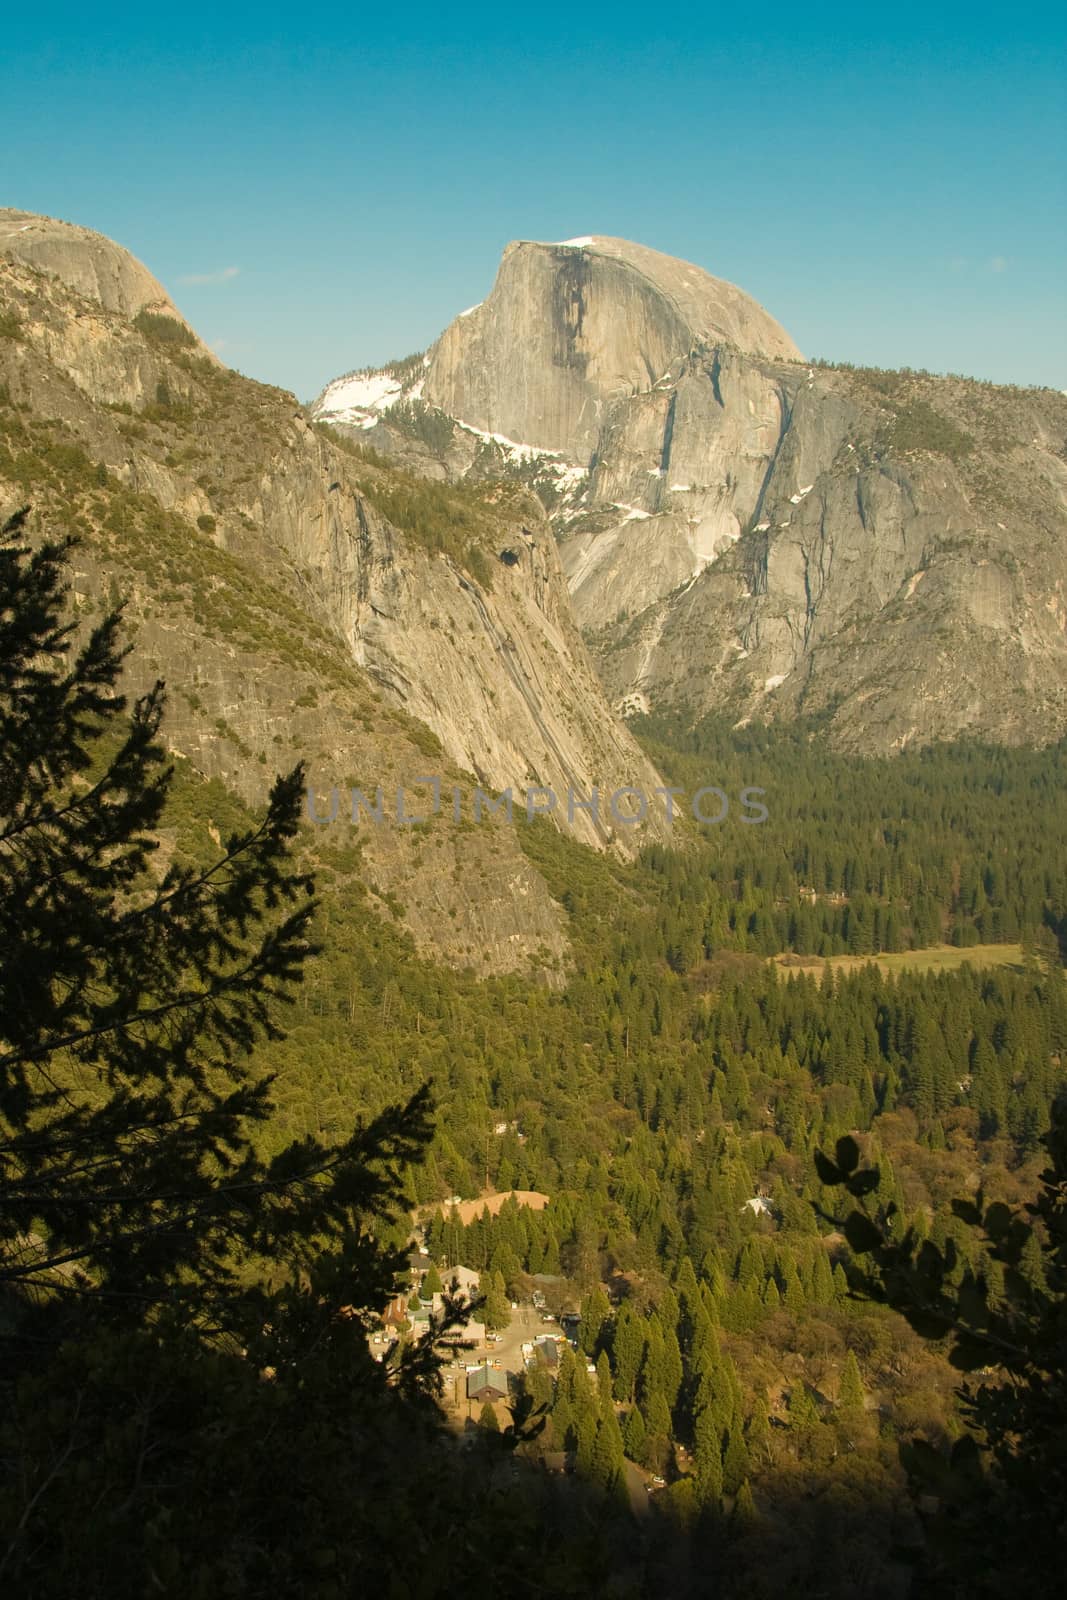 Rock formations in a valley, Half Dome, Yosemite Valley, Yosemite National Park, California, USA